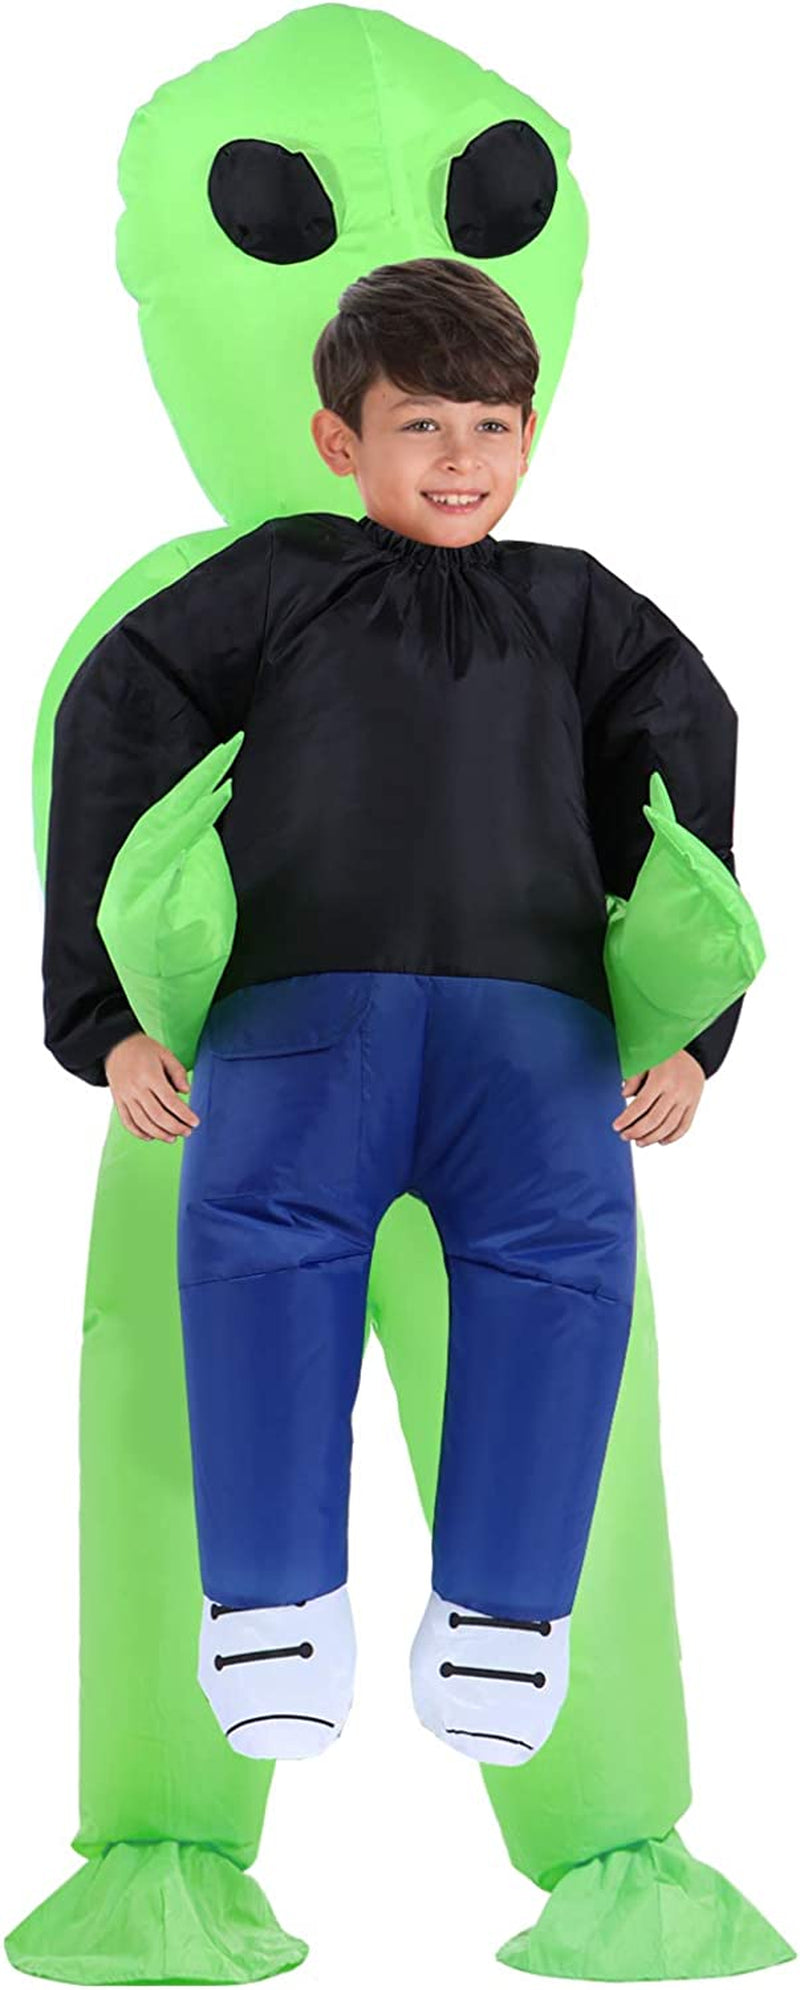 TOLOCO Inflatable Costume for Kid, Inflatable Alien Costume Kids, Alien Holding Person Costume, Halloween Blow up Costume  TOLOCO   